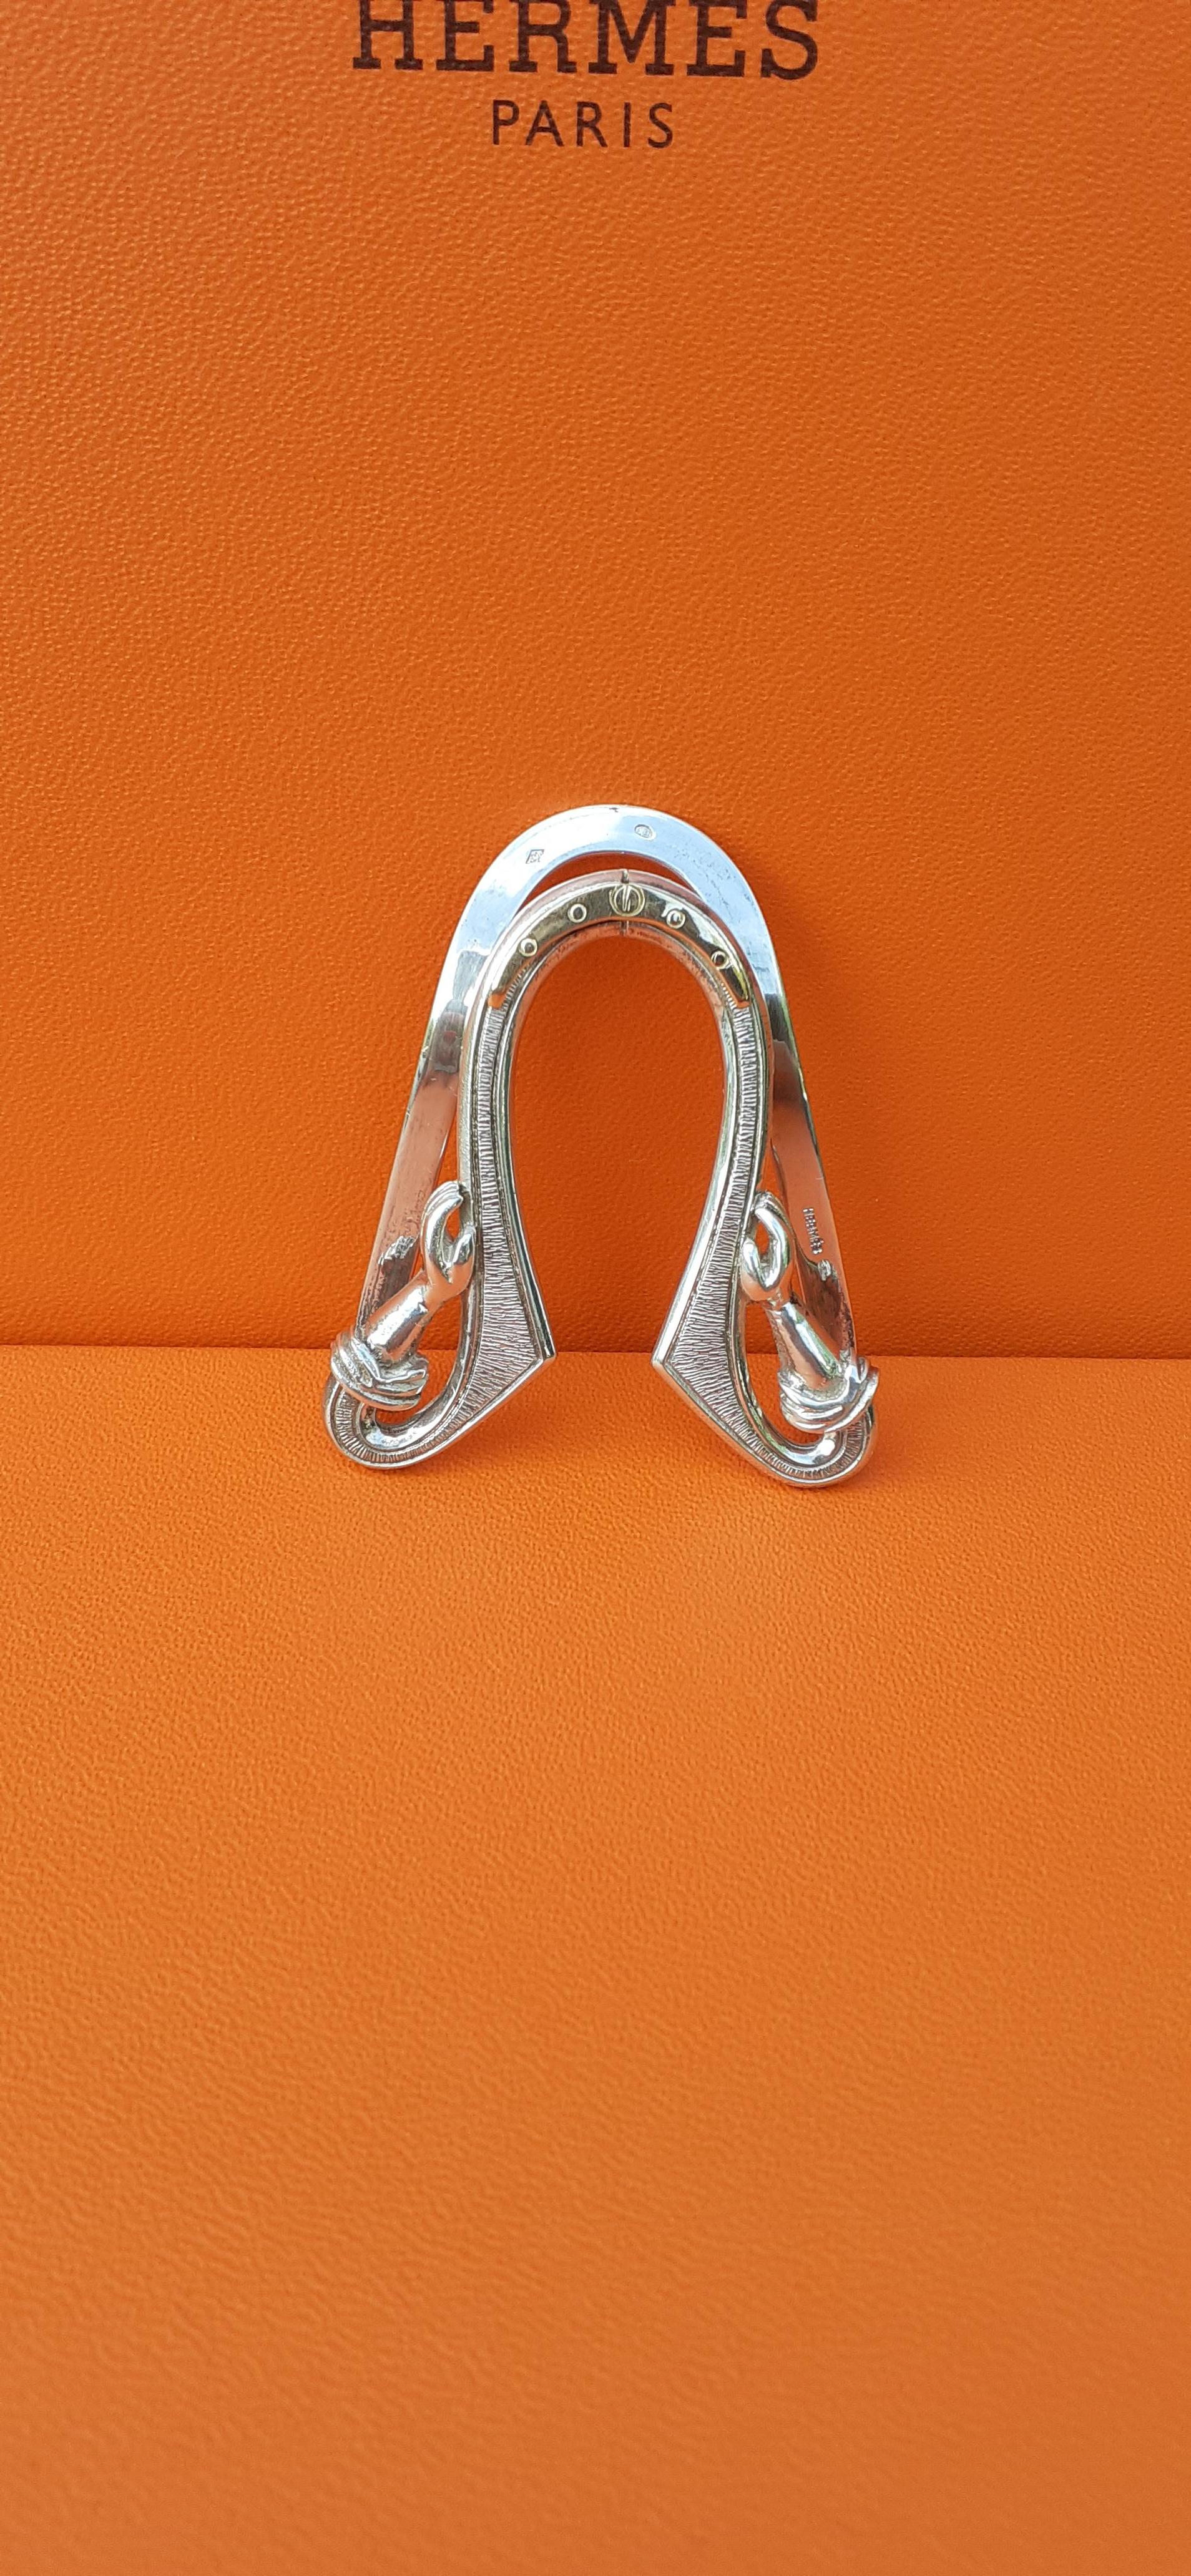 Rare Authentic Hermès Money Clip

The shape is reminiscent of a horseshoe with its rivets, ending in 2 hands

Vintage Item

Made of silver and vermeil

Colorways: silvery and golden

